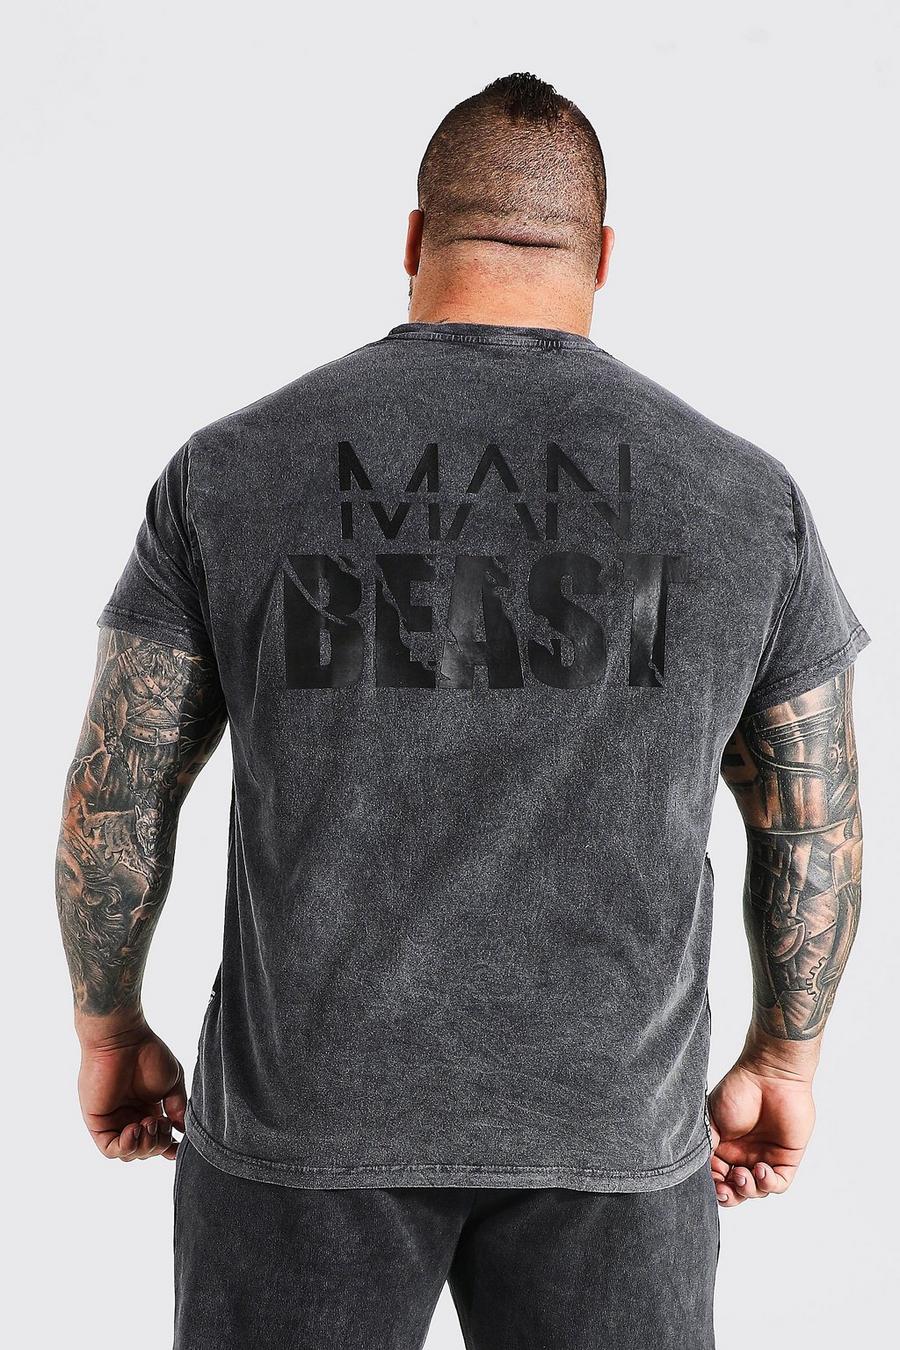 Man Active Gym x Beast Oversize T-Shirt, Charcoal grey image number 1